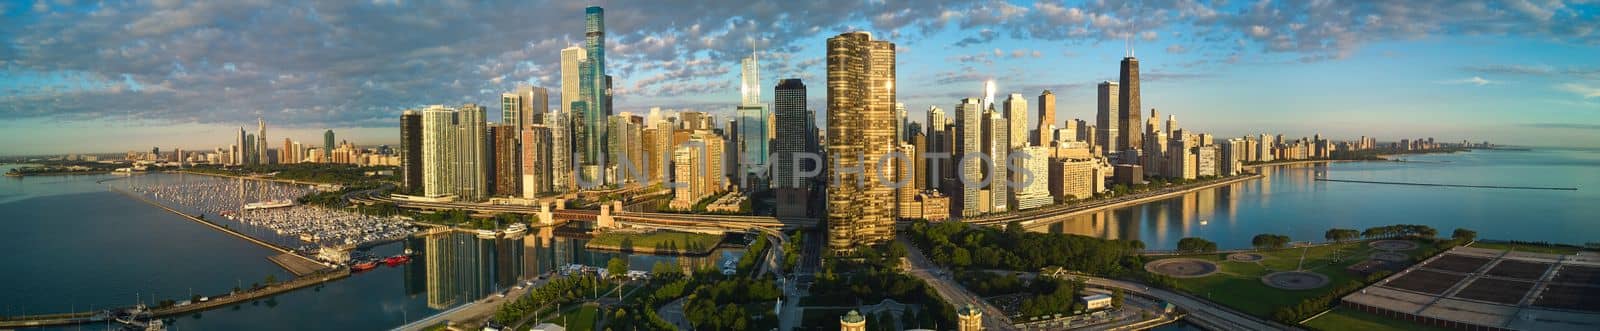 Wide panorama of Chicago city skyline from aerial view at Navy Pier during sunrise by njproductions